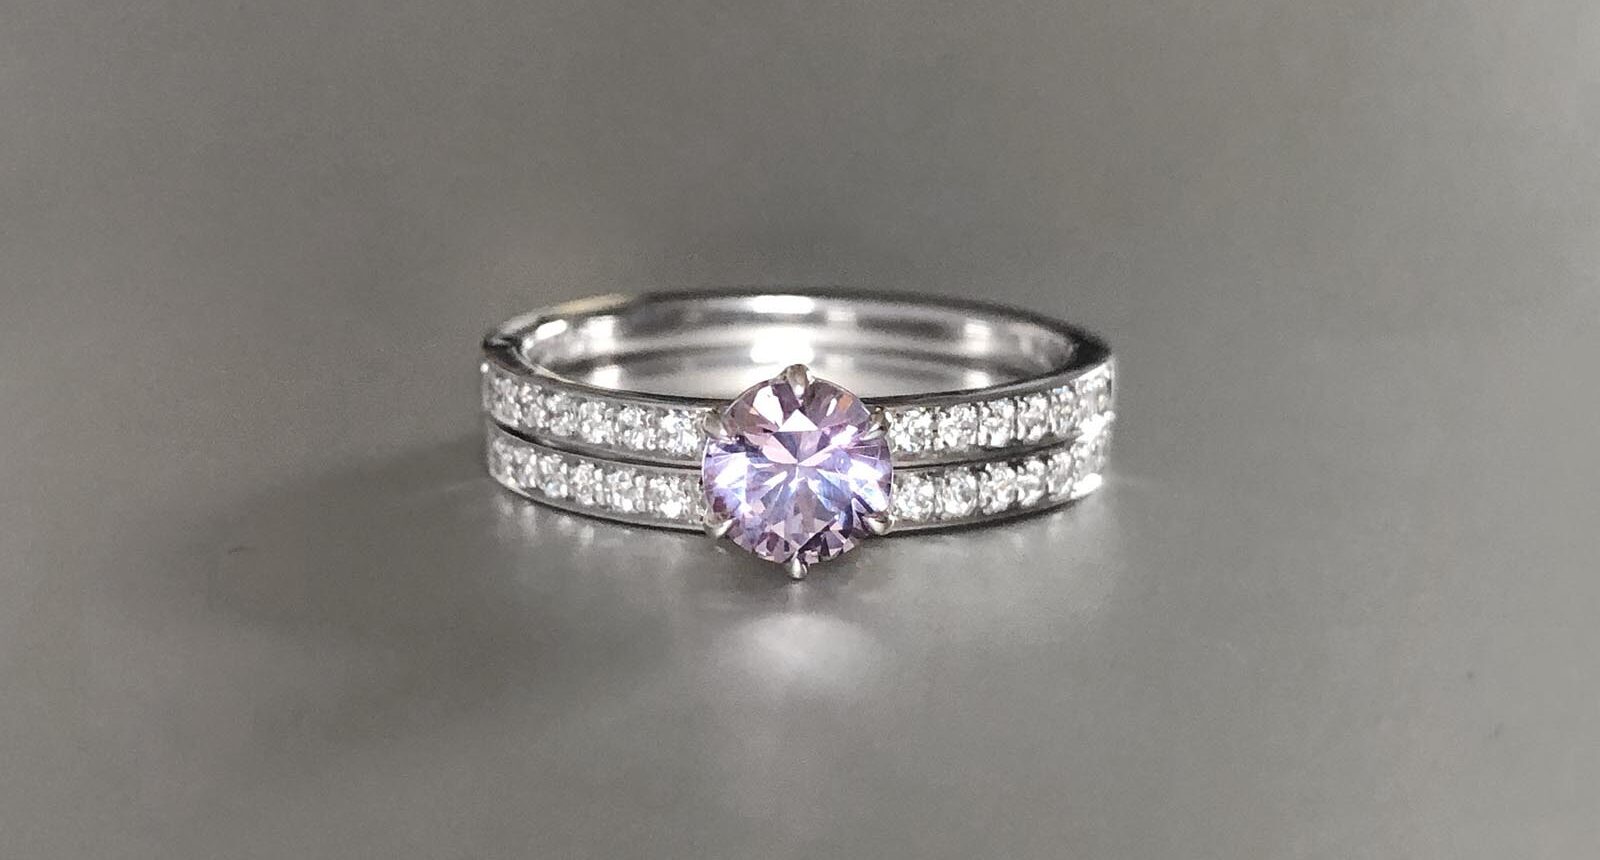 Lilac spinel ring in white gold